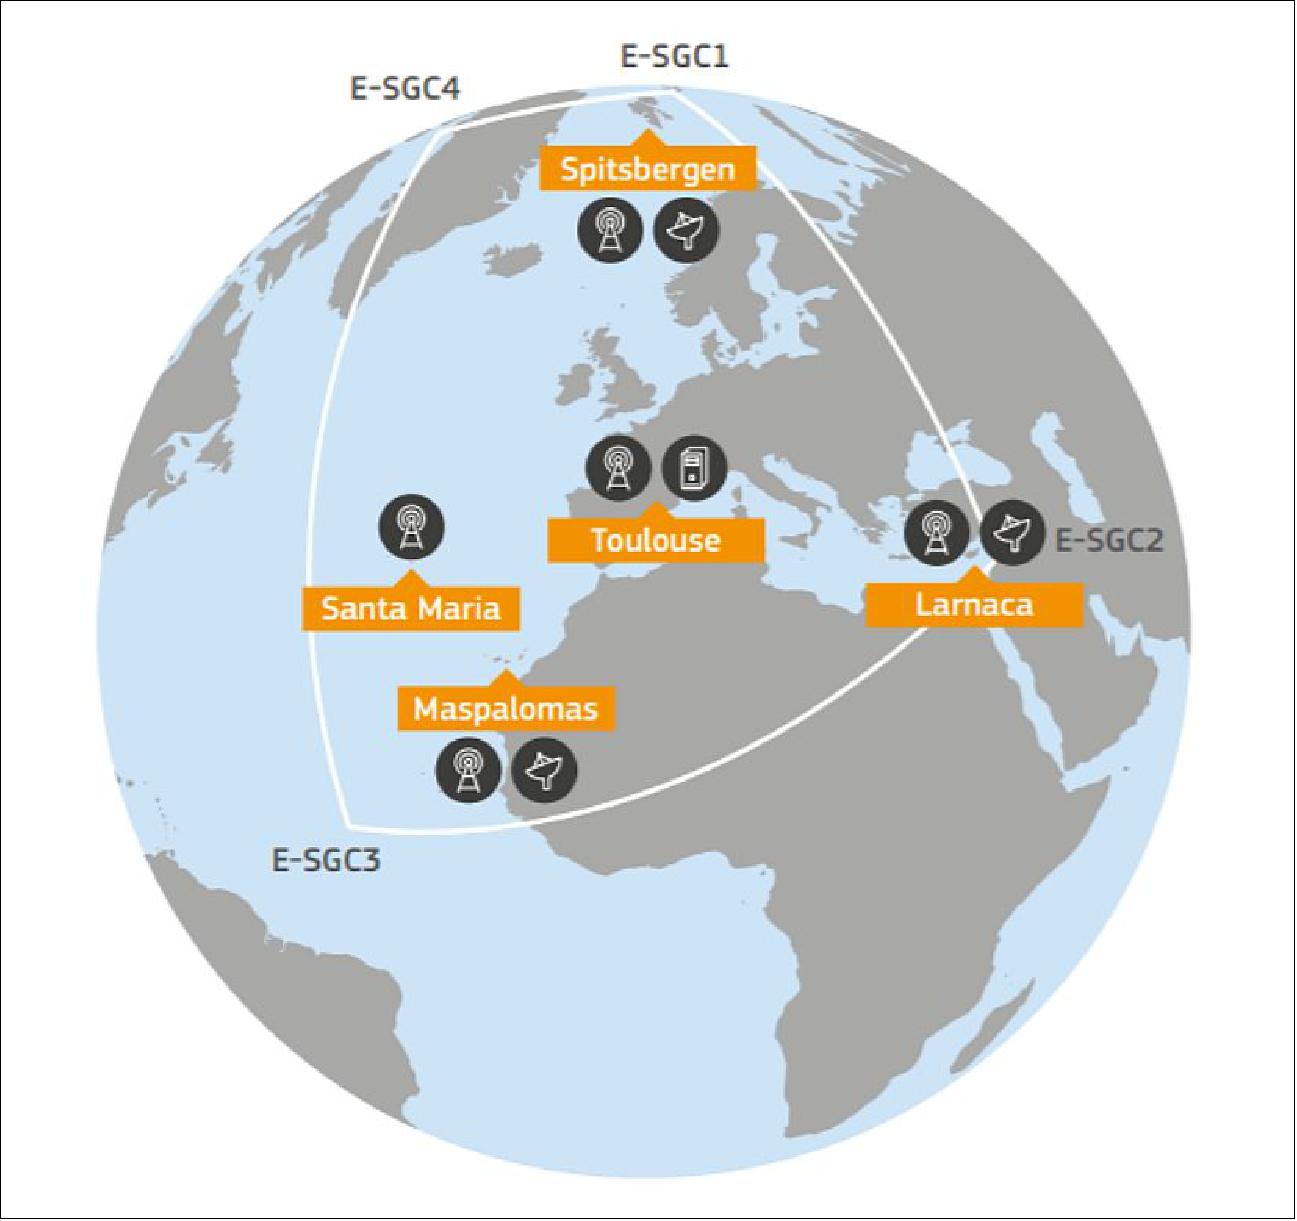 Figure 116: European SAR/Galileo forward link service coverage and SAR/Galileo sites (Source: Galileo Search and Rescue Service Definition Document, Figure 3, page 8)